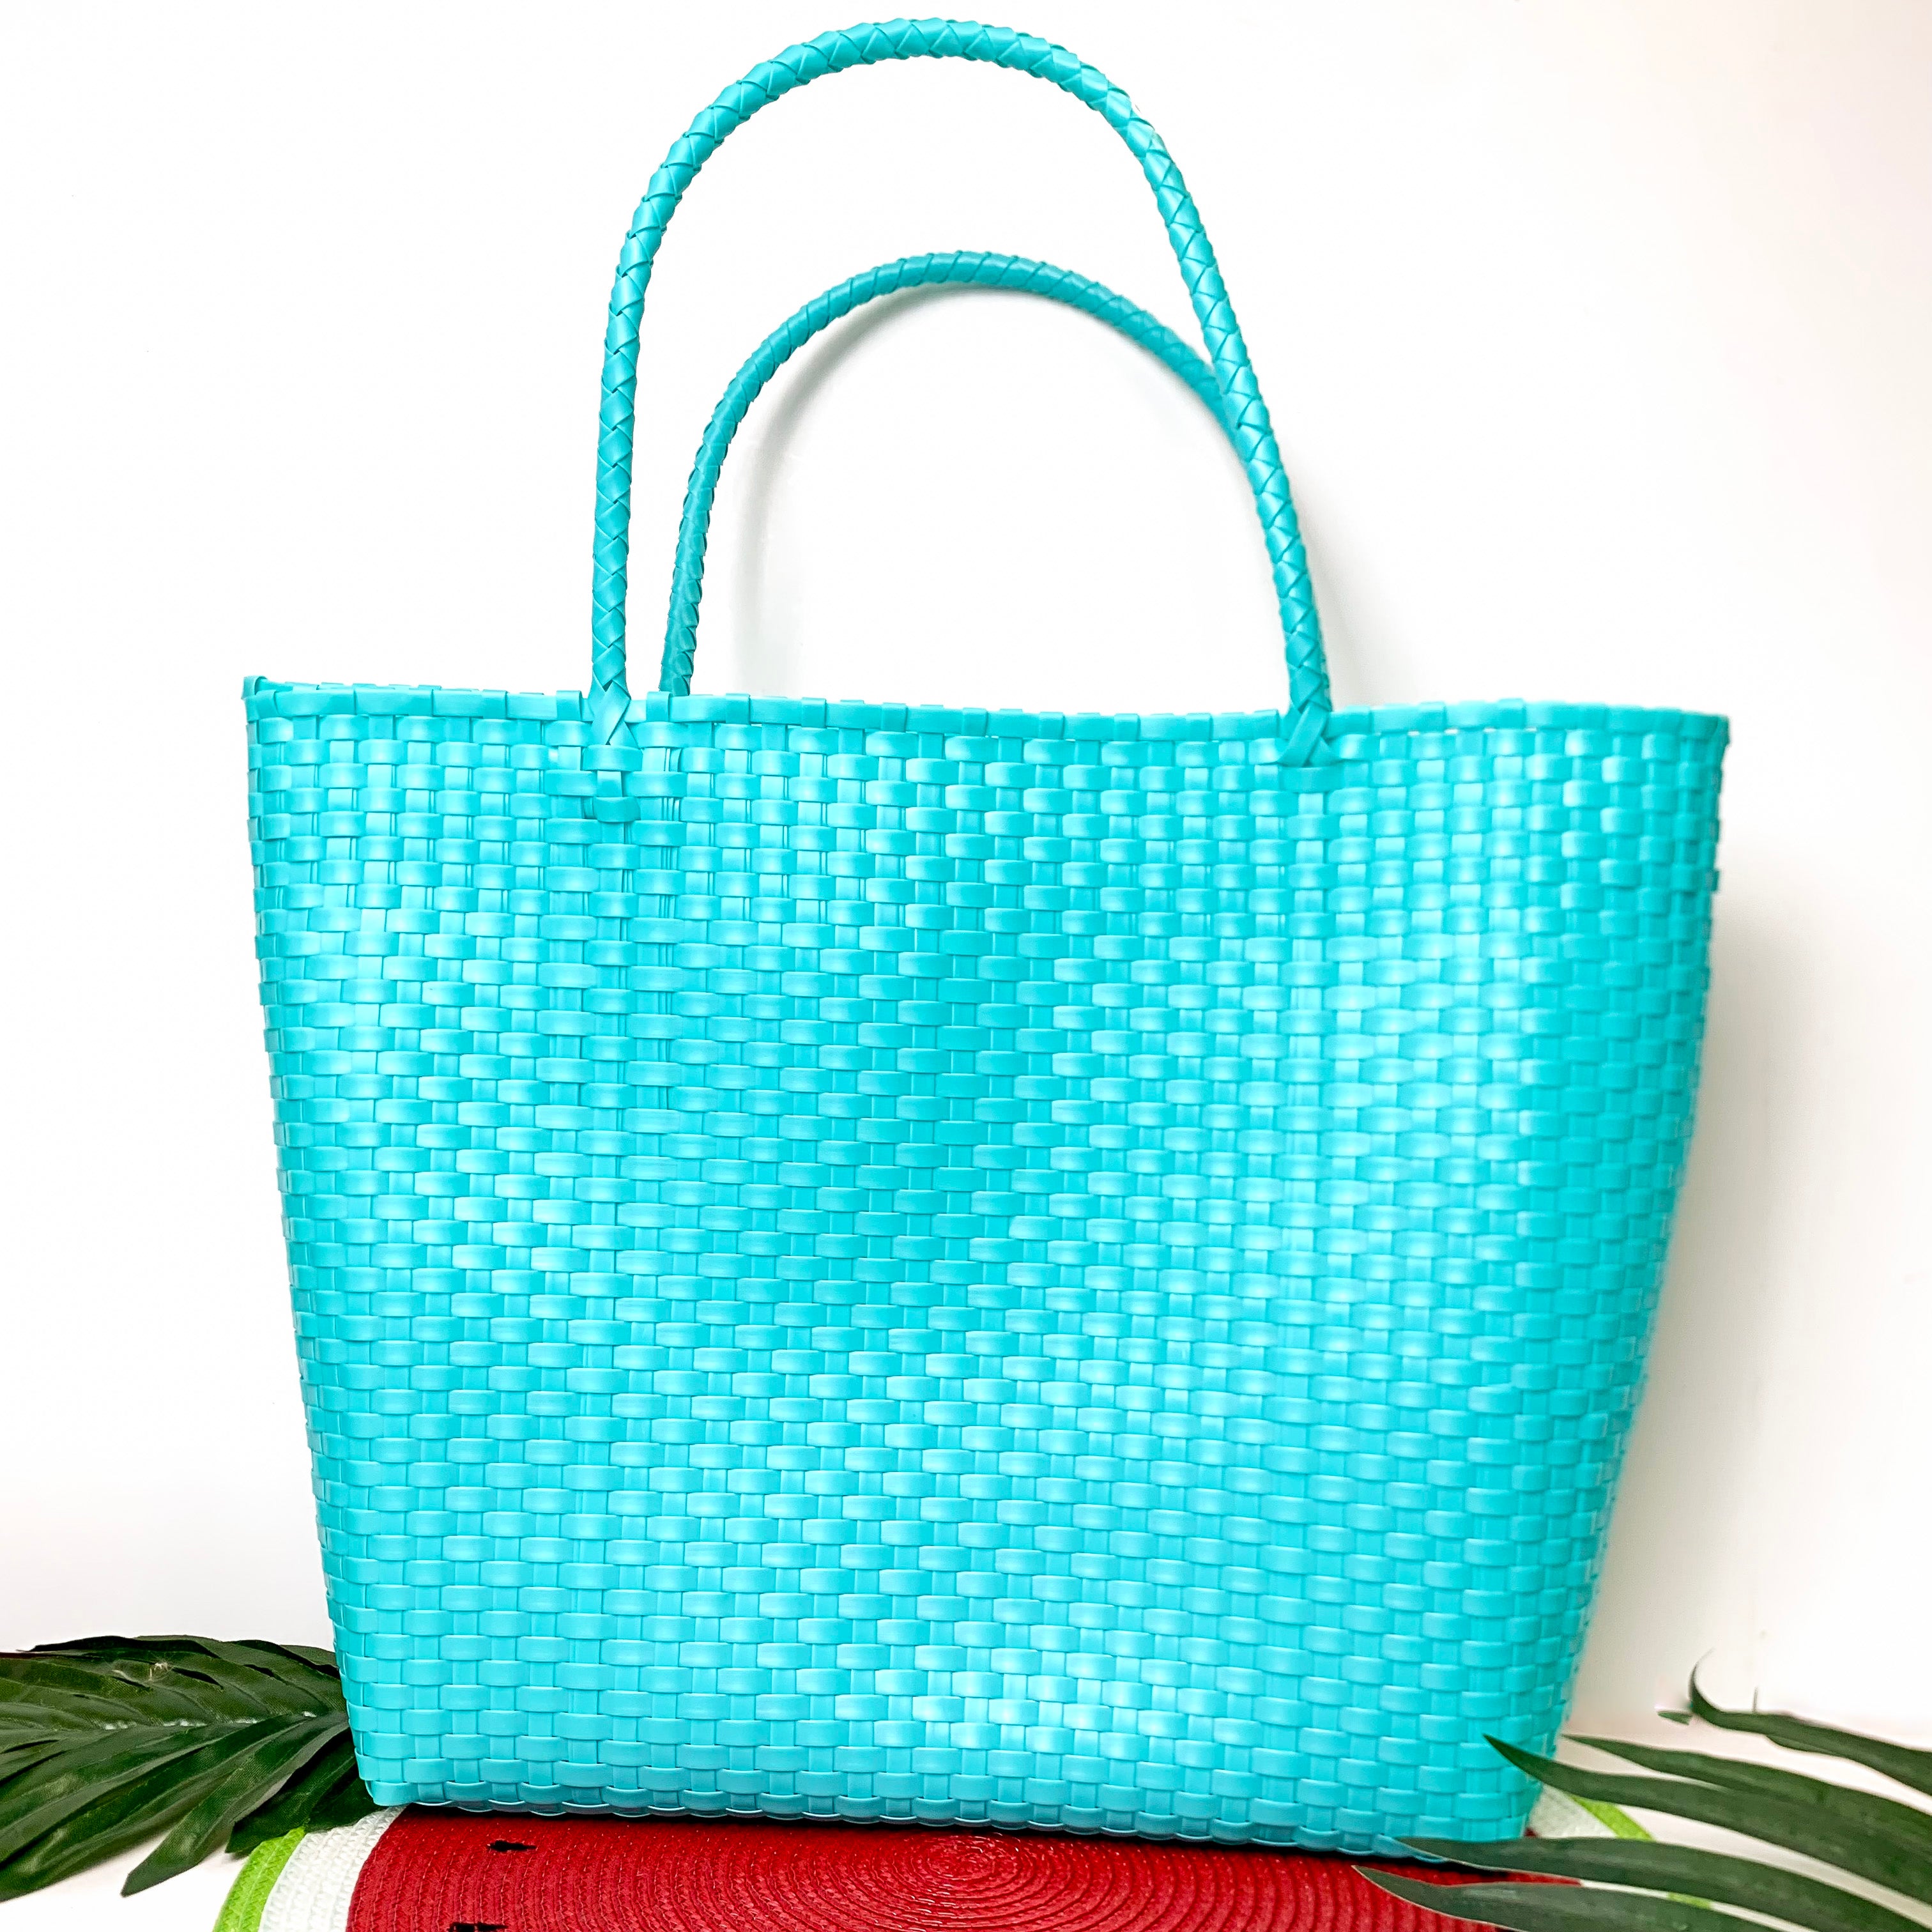 Coastal Couture Carryall Tote Bag in Turquoise Blue - Giddy Up Glamour Boutique